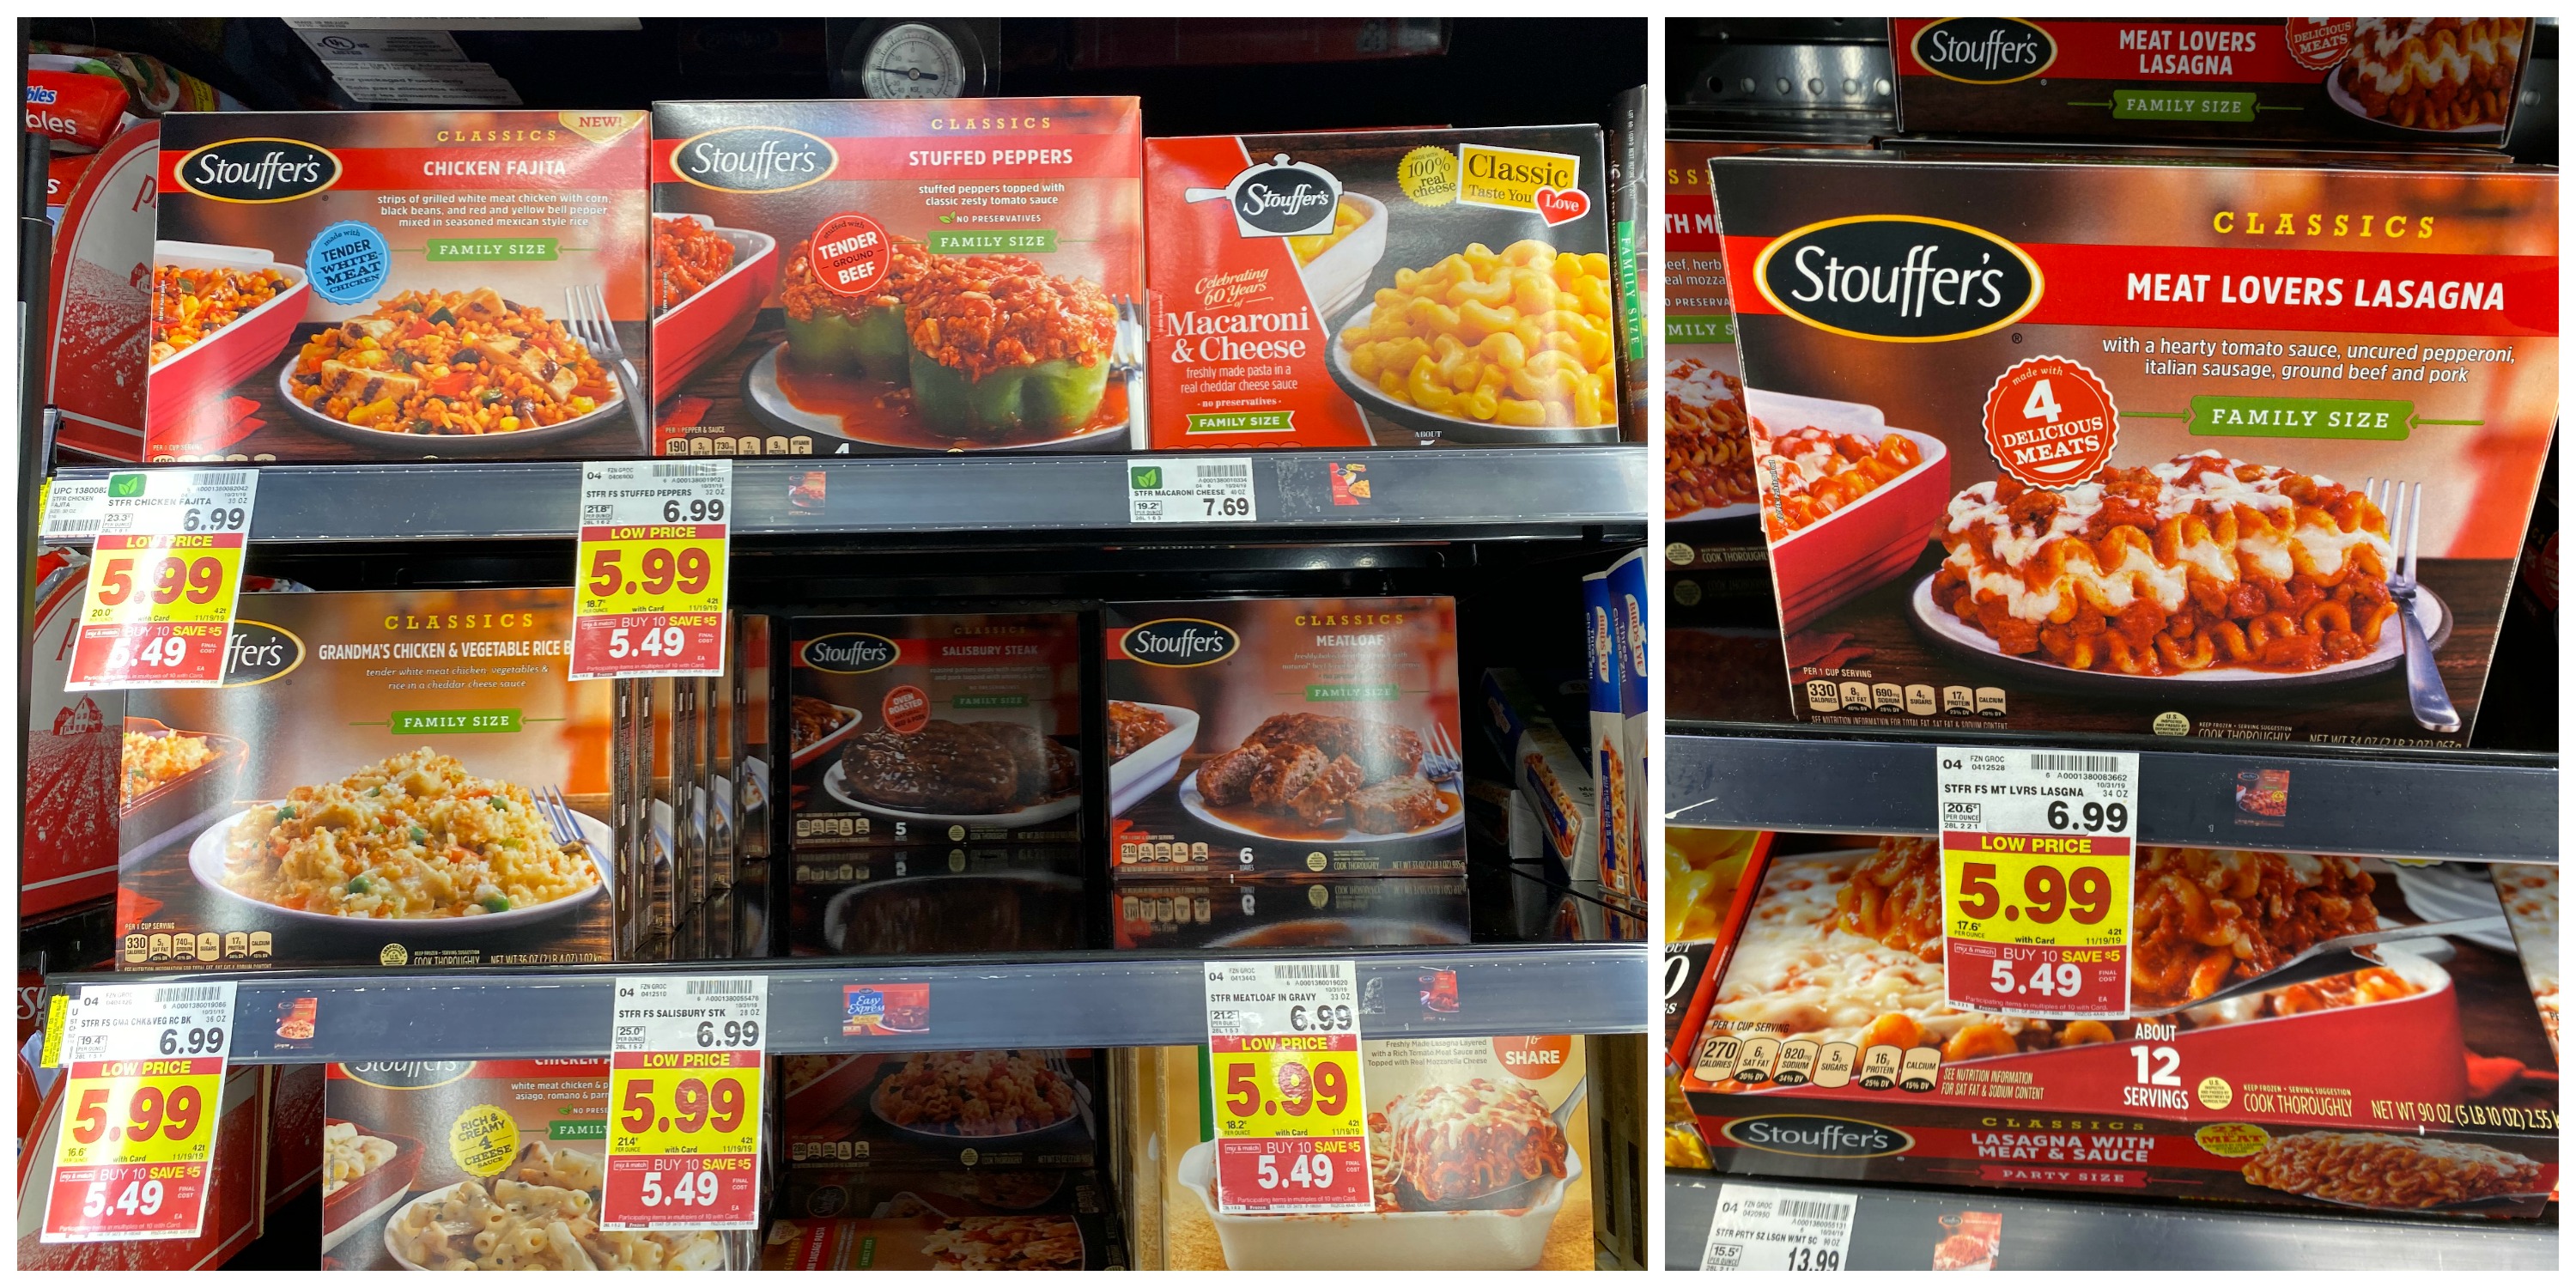 Stouffer’s Family Size Meals are JUST $2.49 at Kroger During Mega Event